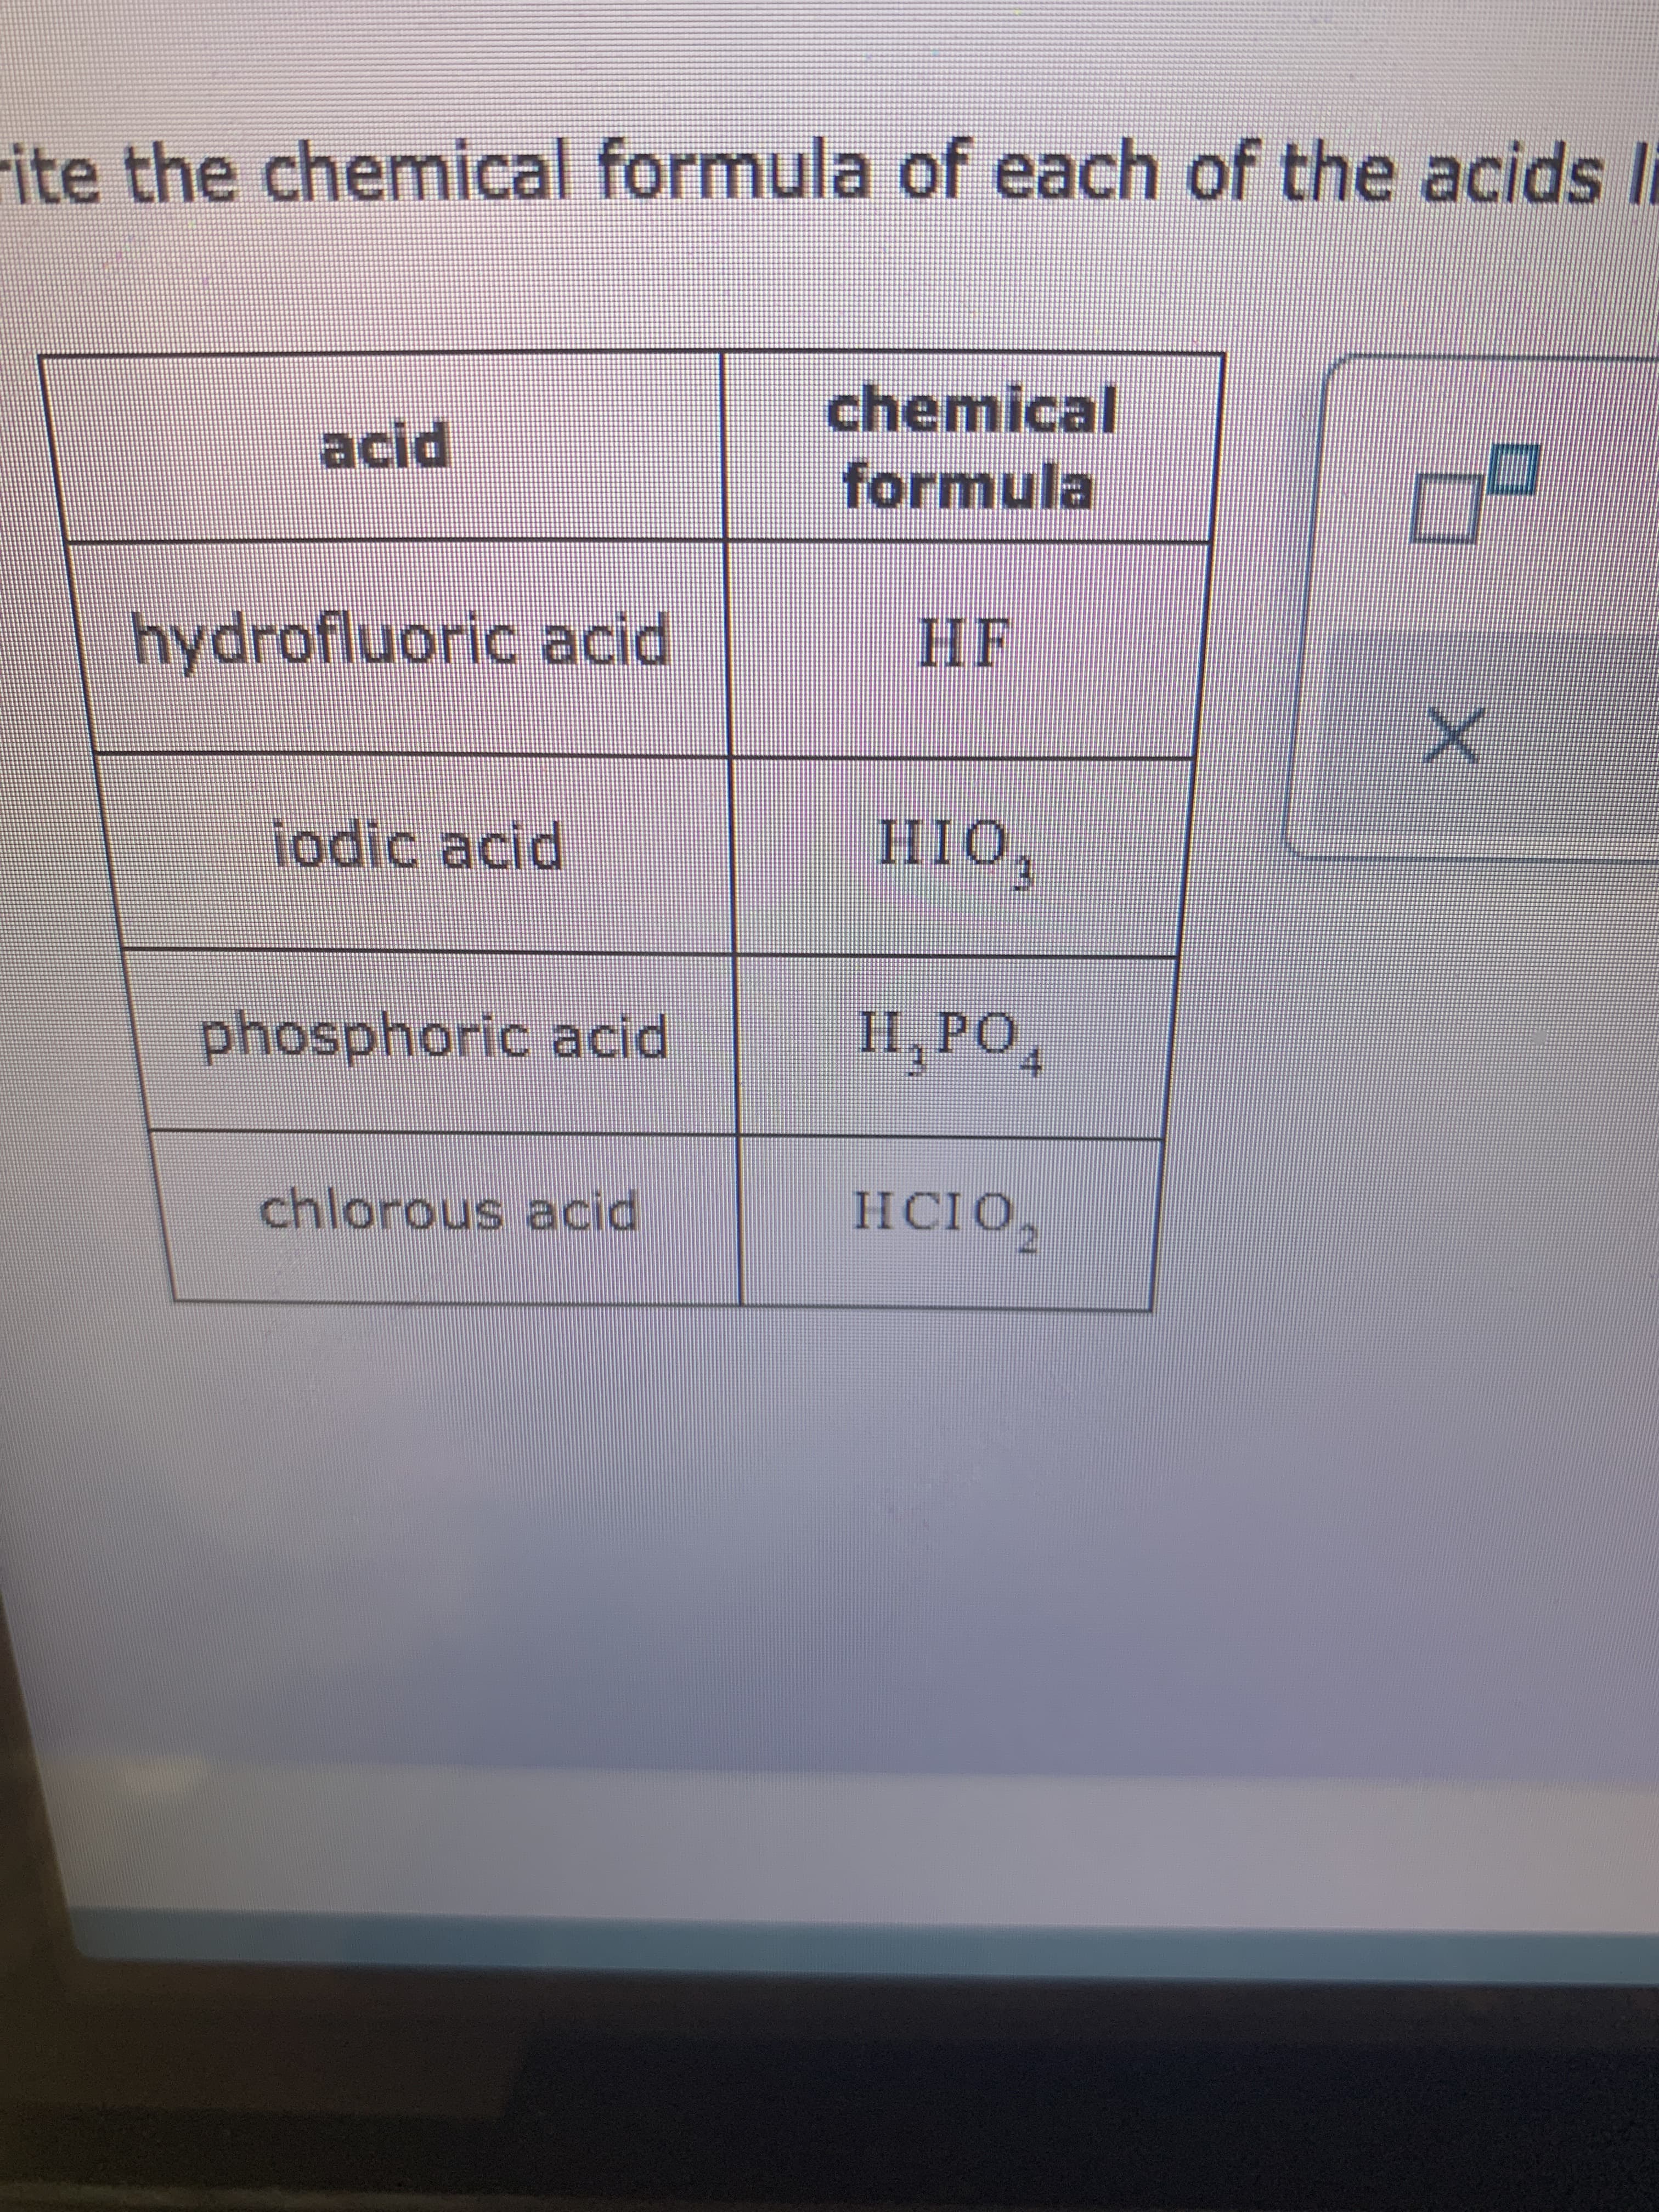 chemical formula of each of the acids
